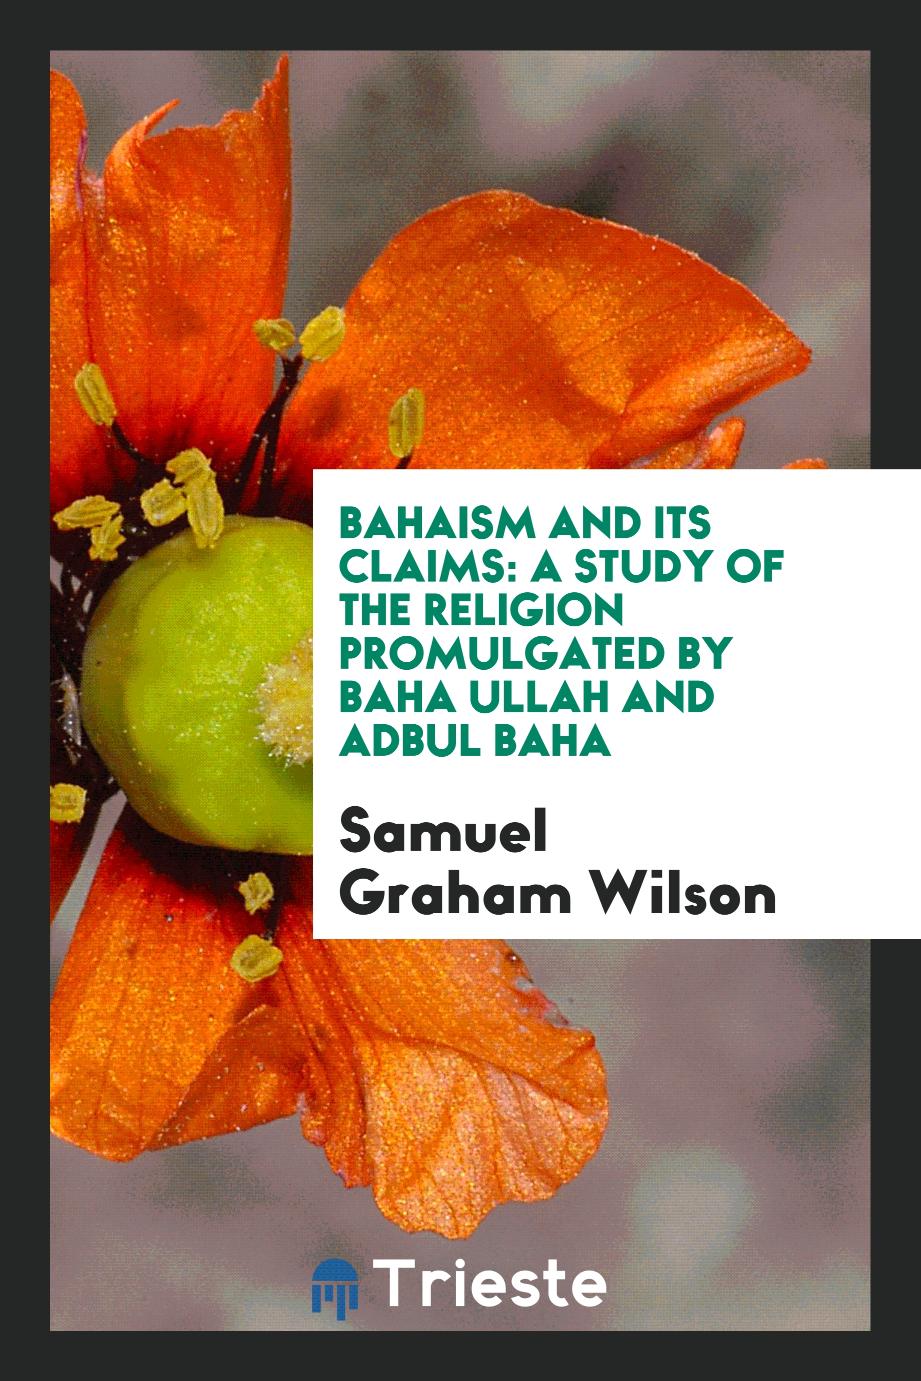 Bahaism and Its Claims: A Study of the Religion Promulgated by Baha Ullah and Adbul Baha